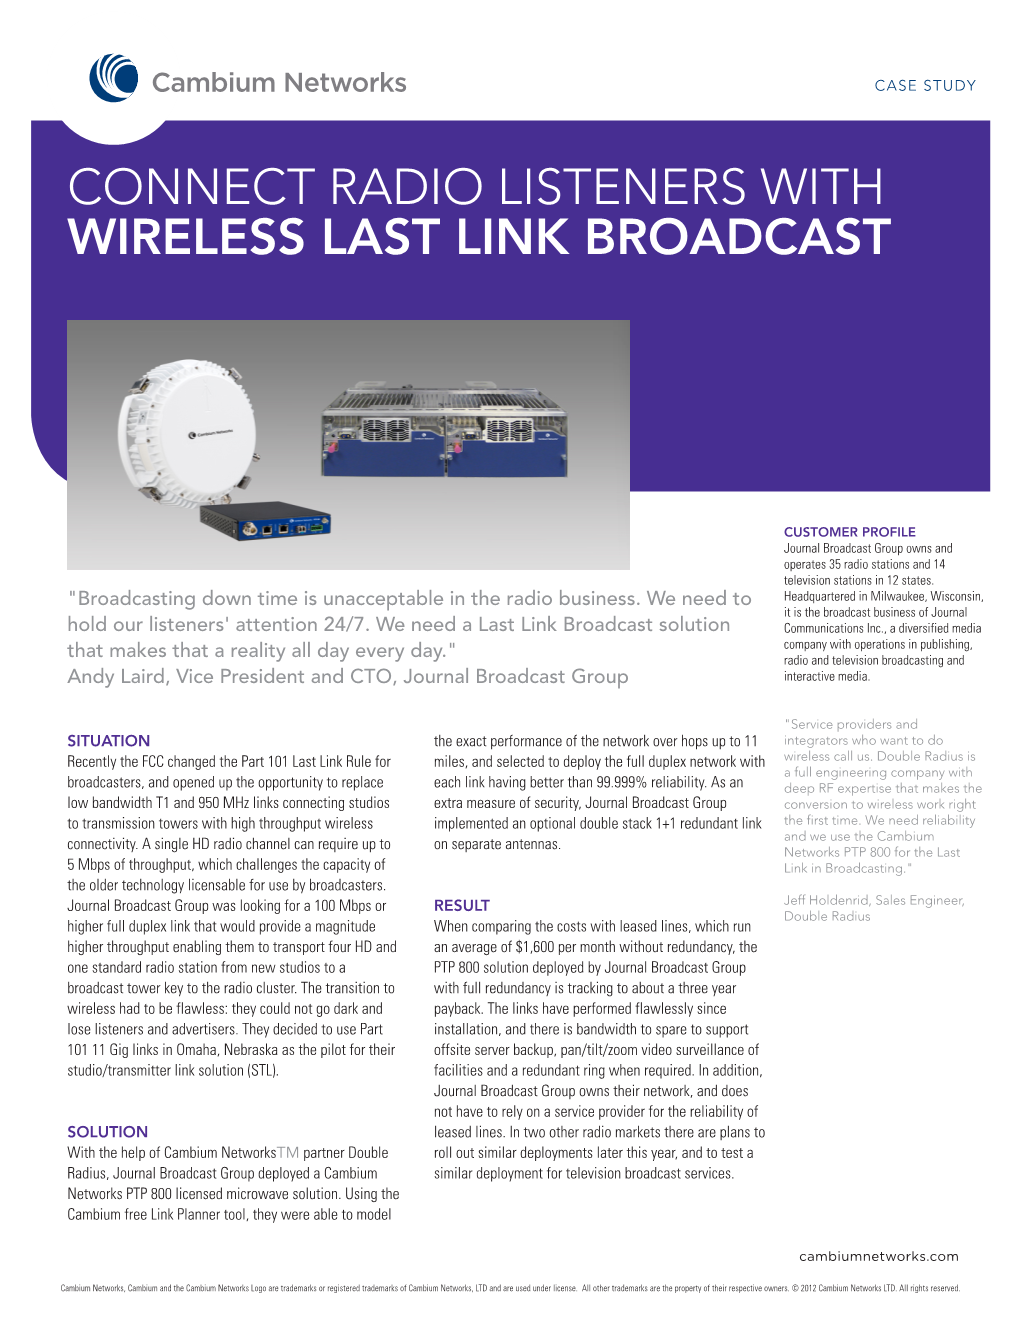 Connect Radio Listeners with Wireless Last Link Broadcast